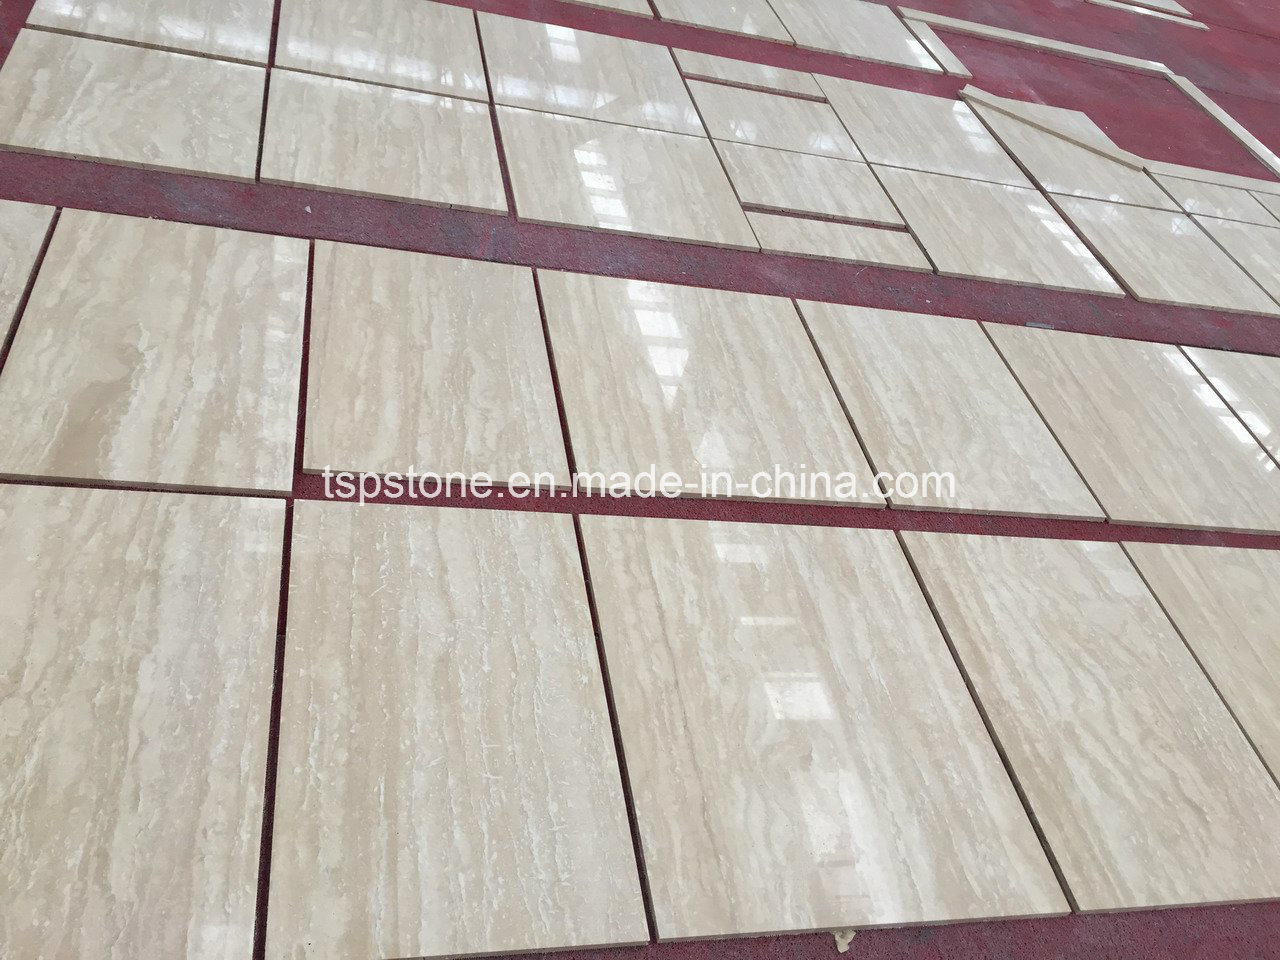 Natural Marble Tile for Flooring